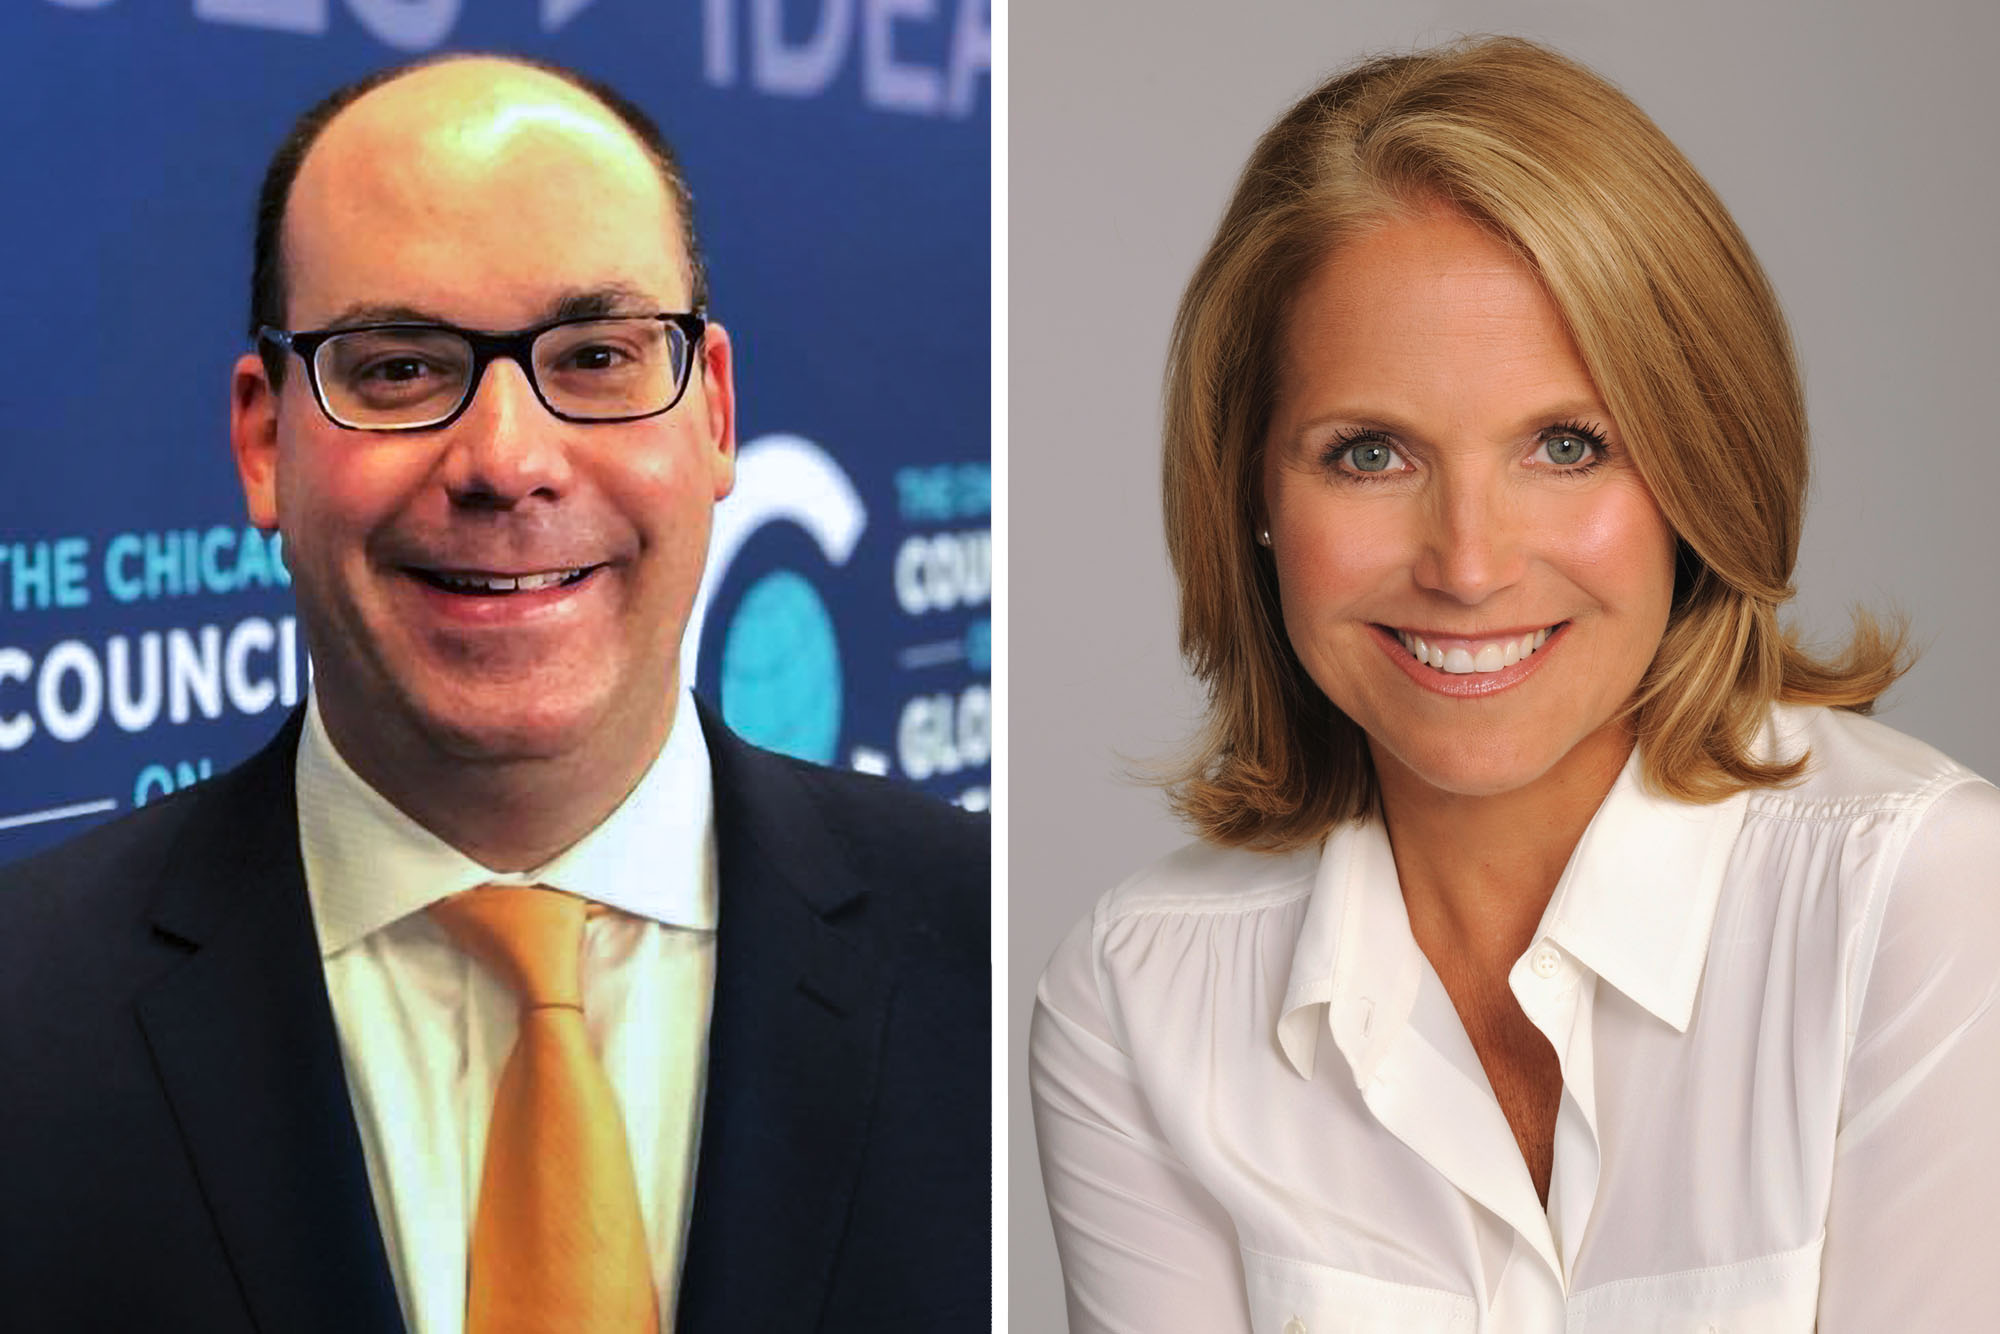 Headshots: Dr. Levy, left and Katie Couric, right